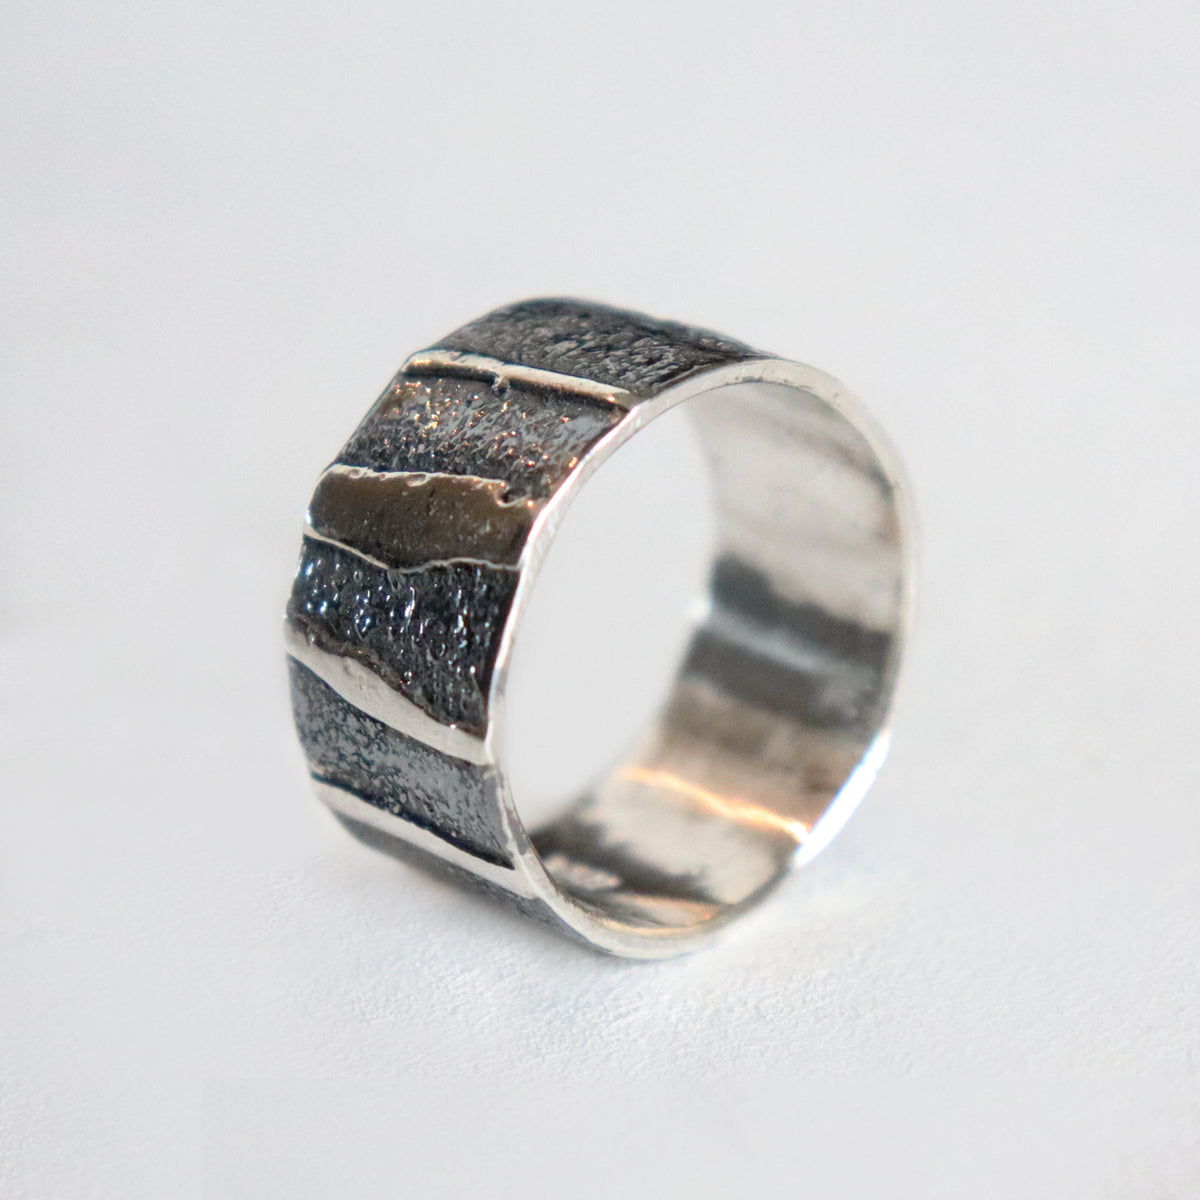 wide silver ring, dark patina and polished accent stripes. Handcrafted by roff